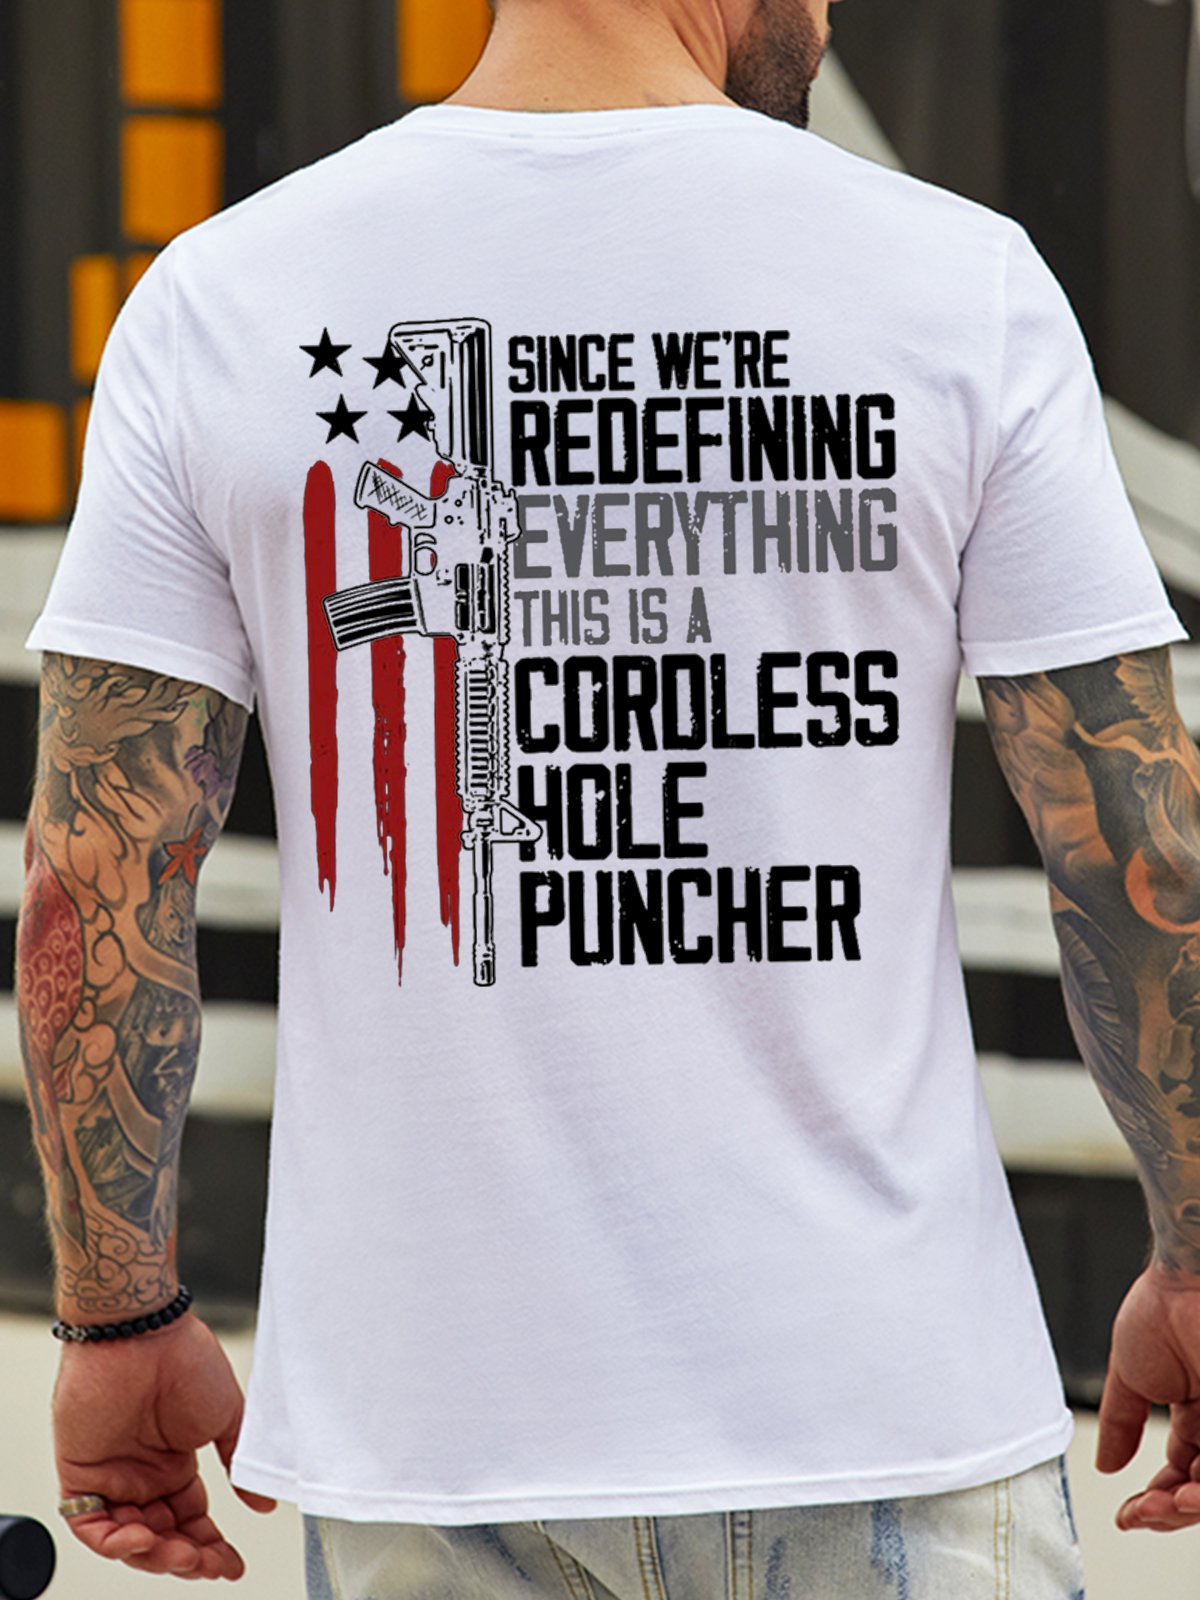 Since We Are Redefining Everything This Is A Cordless Hole Puncher Men's Shirts & Tops